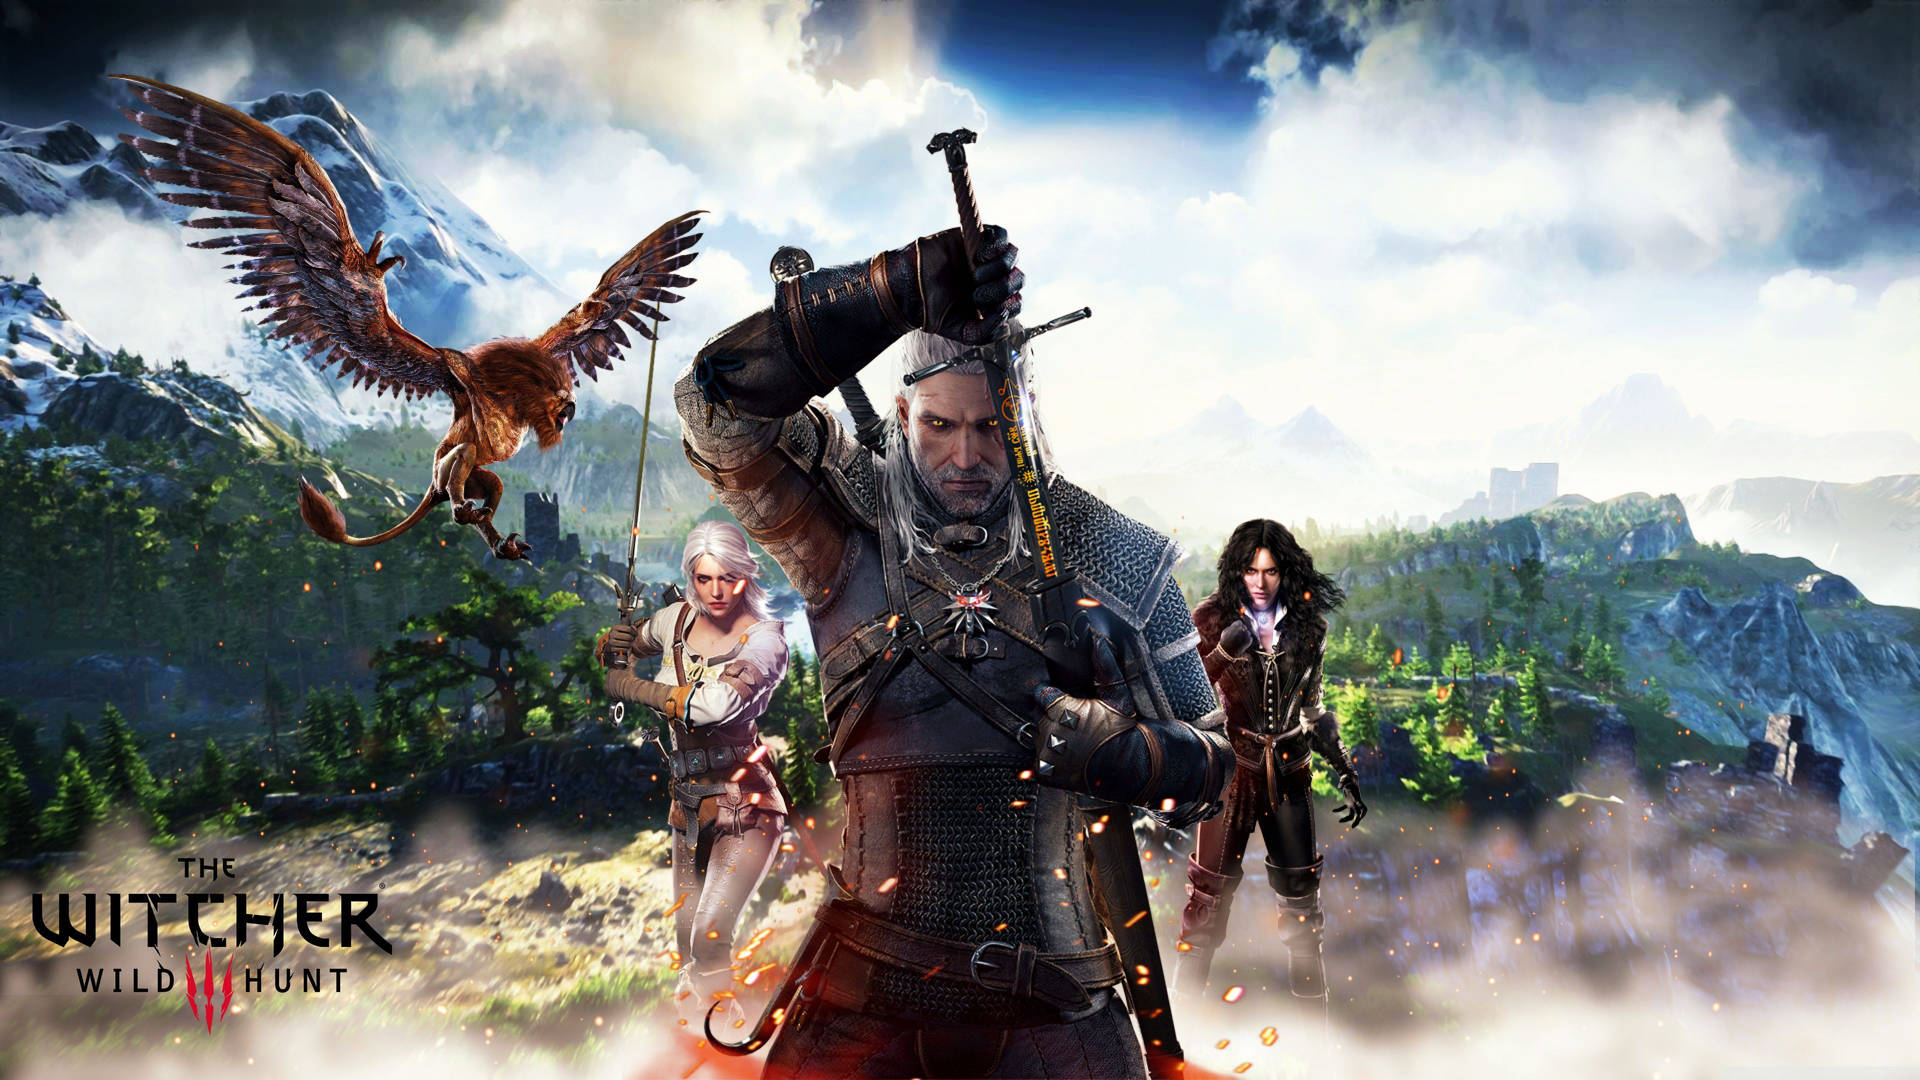 The Witcher Wild Hunt Poster Wallpaper